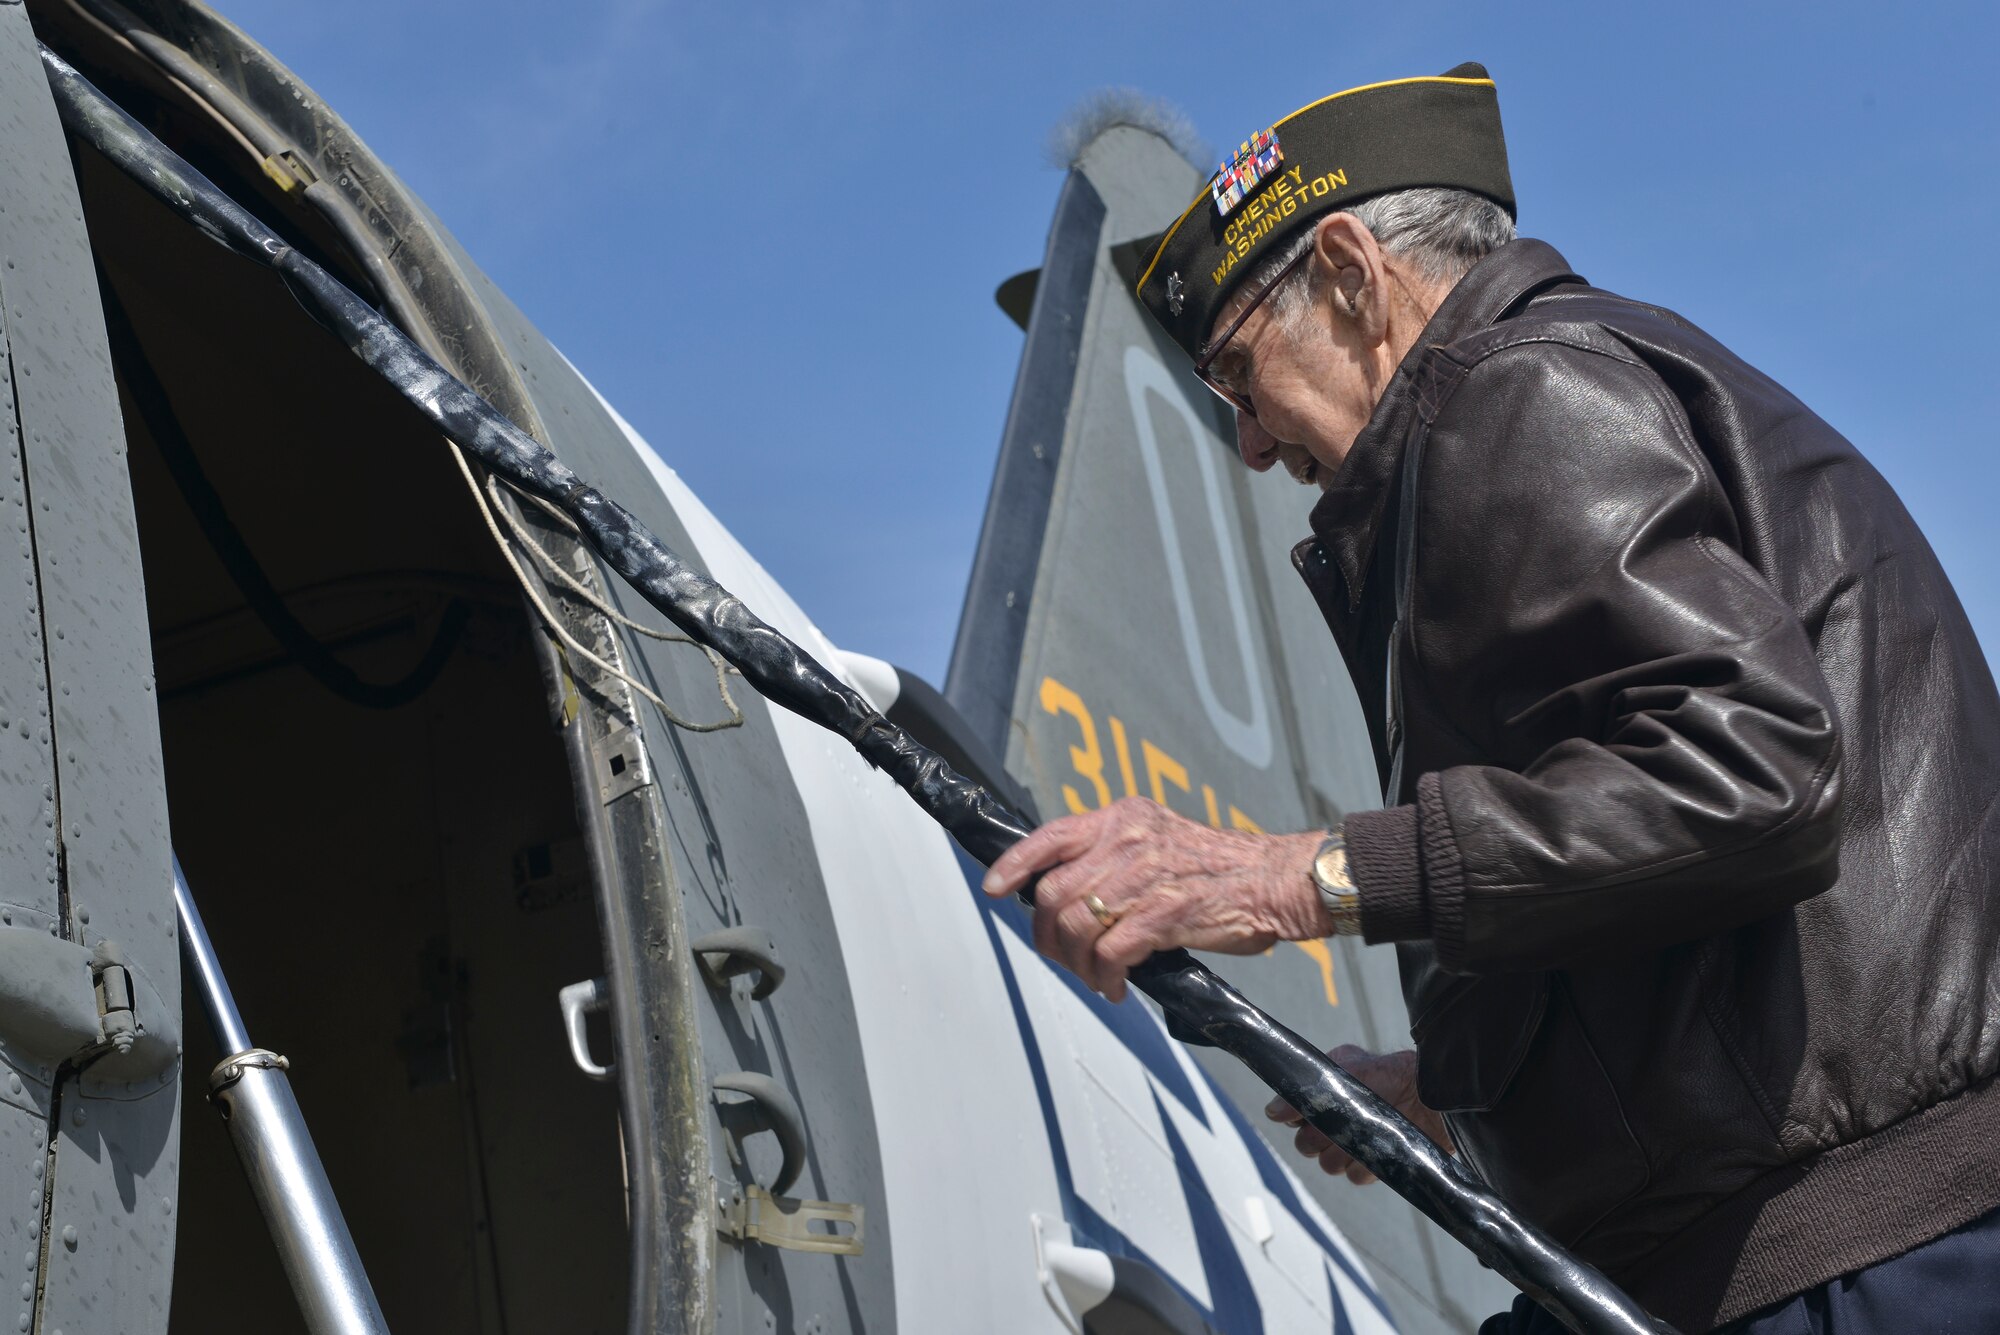 Retired U.S. Air Force Lt. Col. Alston Daniels climbs into a C-47D Skytrain aircraft for the first time in 53 years April 7, 2015, at Fairchild AFB, Wash. Daniels flew the C-47 during World War II and had the chance to visit the aircraft while it is on static display. (U.S. Air Force photo/Staff Sgt. Alex Montes)